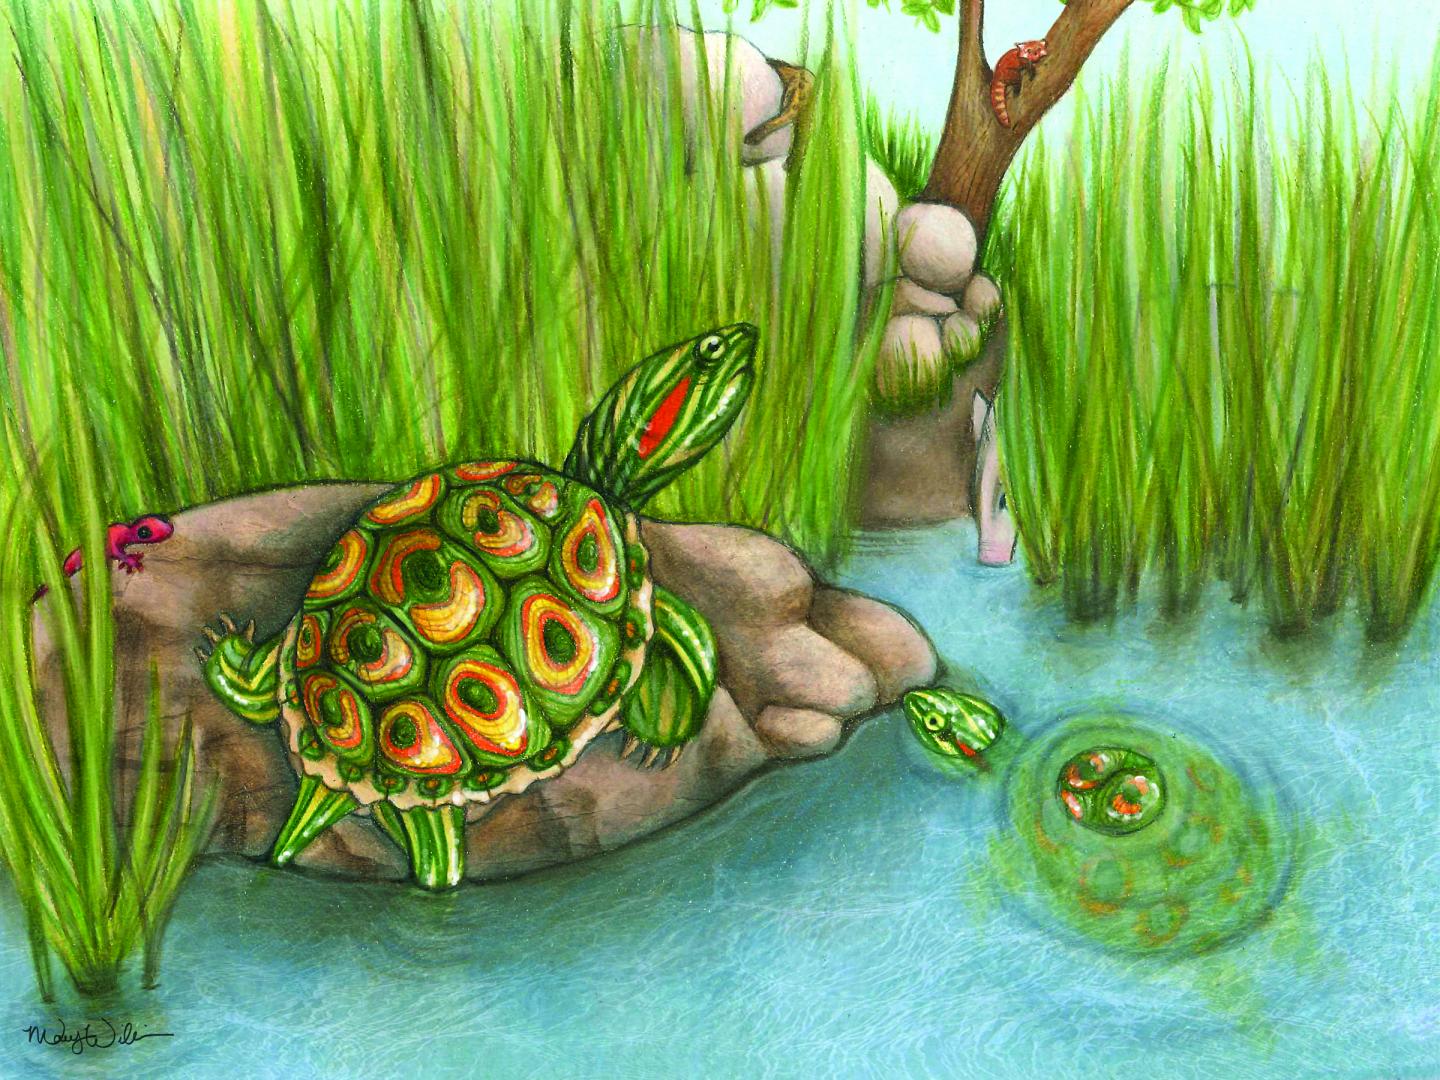 Reconstruction of An Ancient Slider Turtle